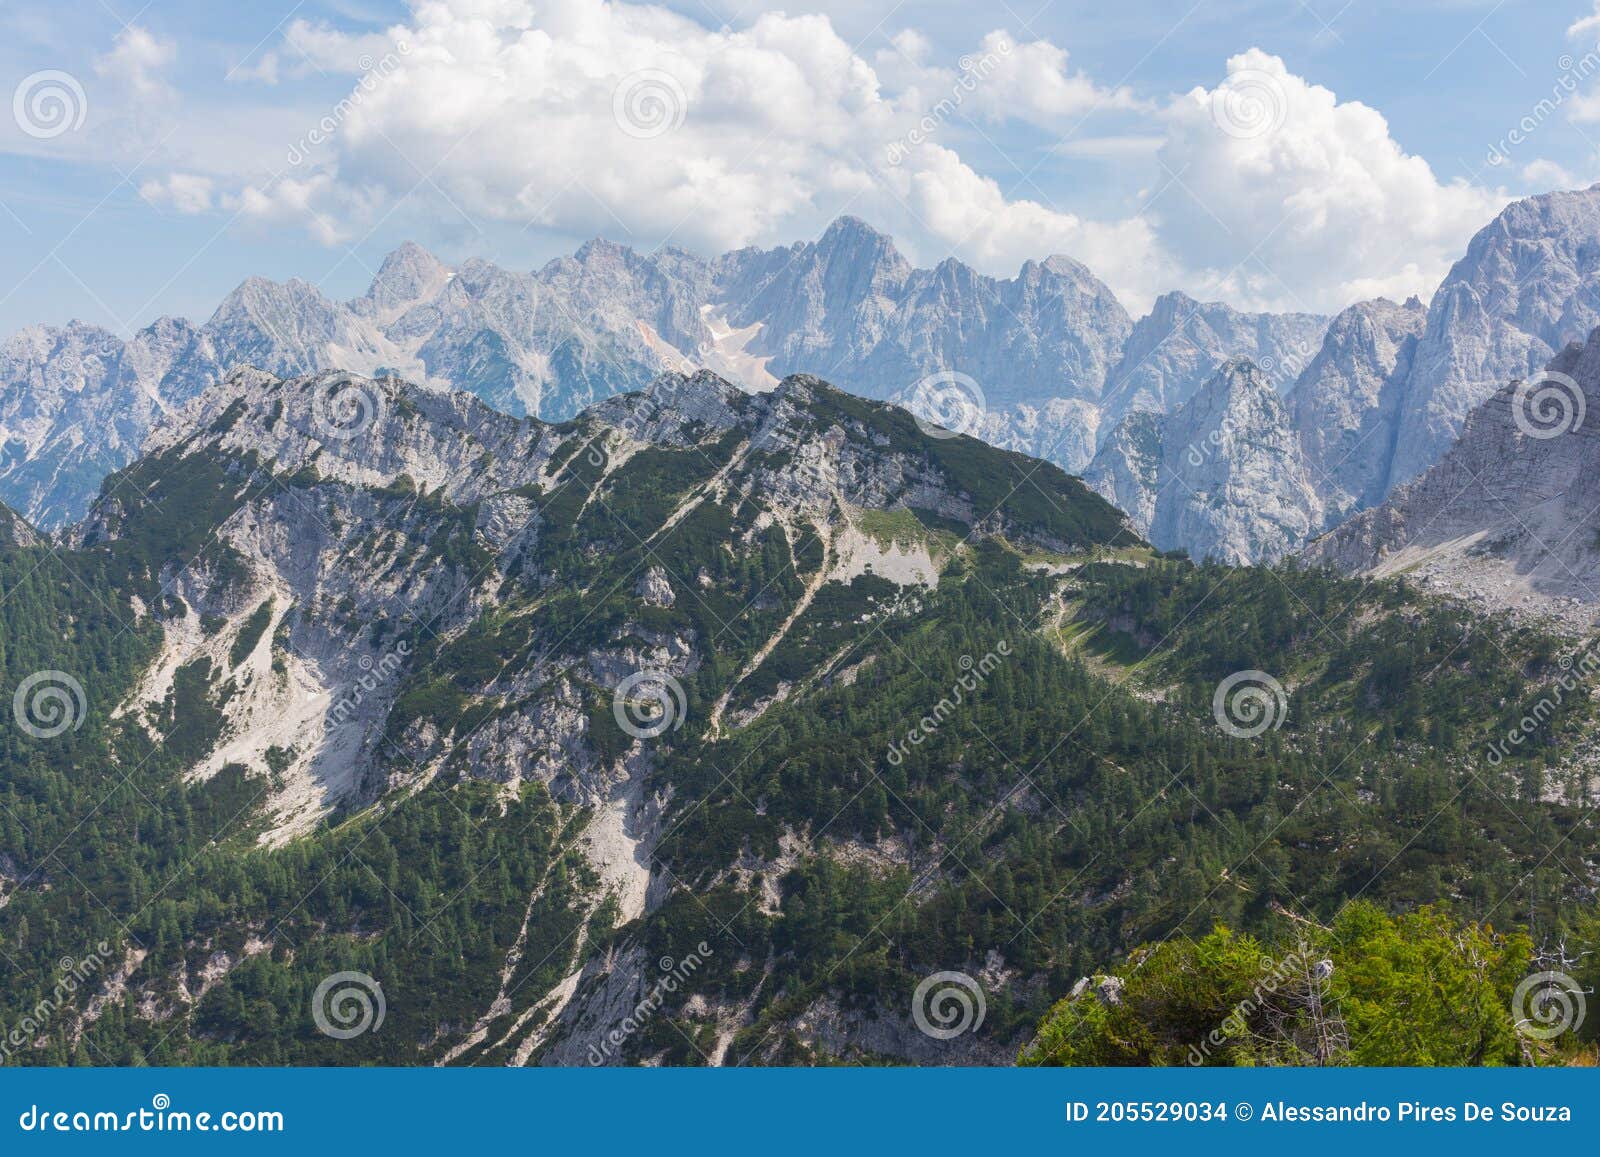 high mountains in slovenia during the hiking to slemenova ÃÂ pica.